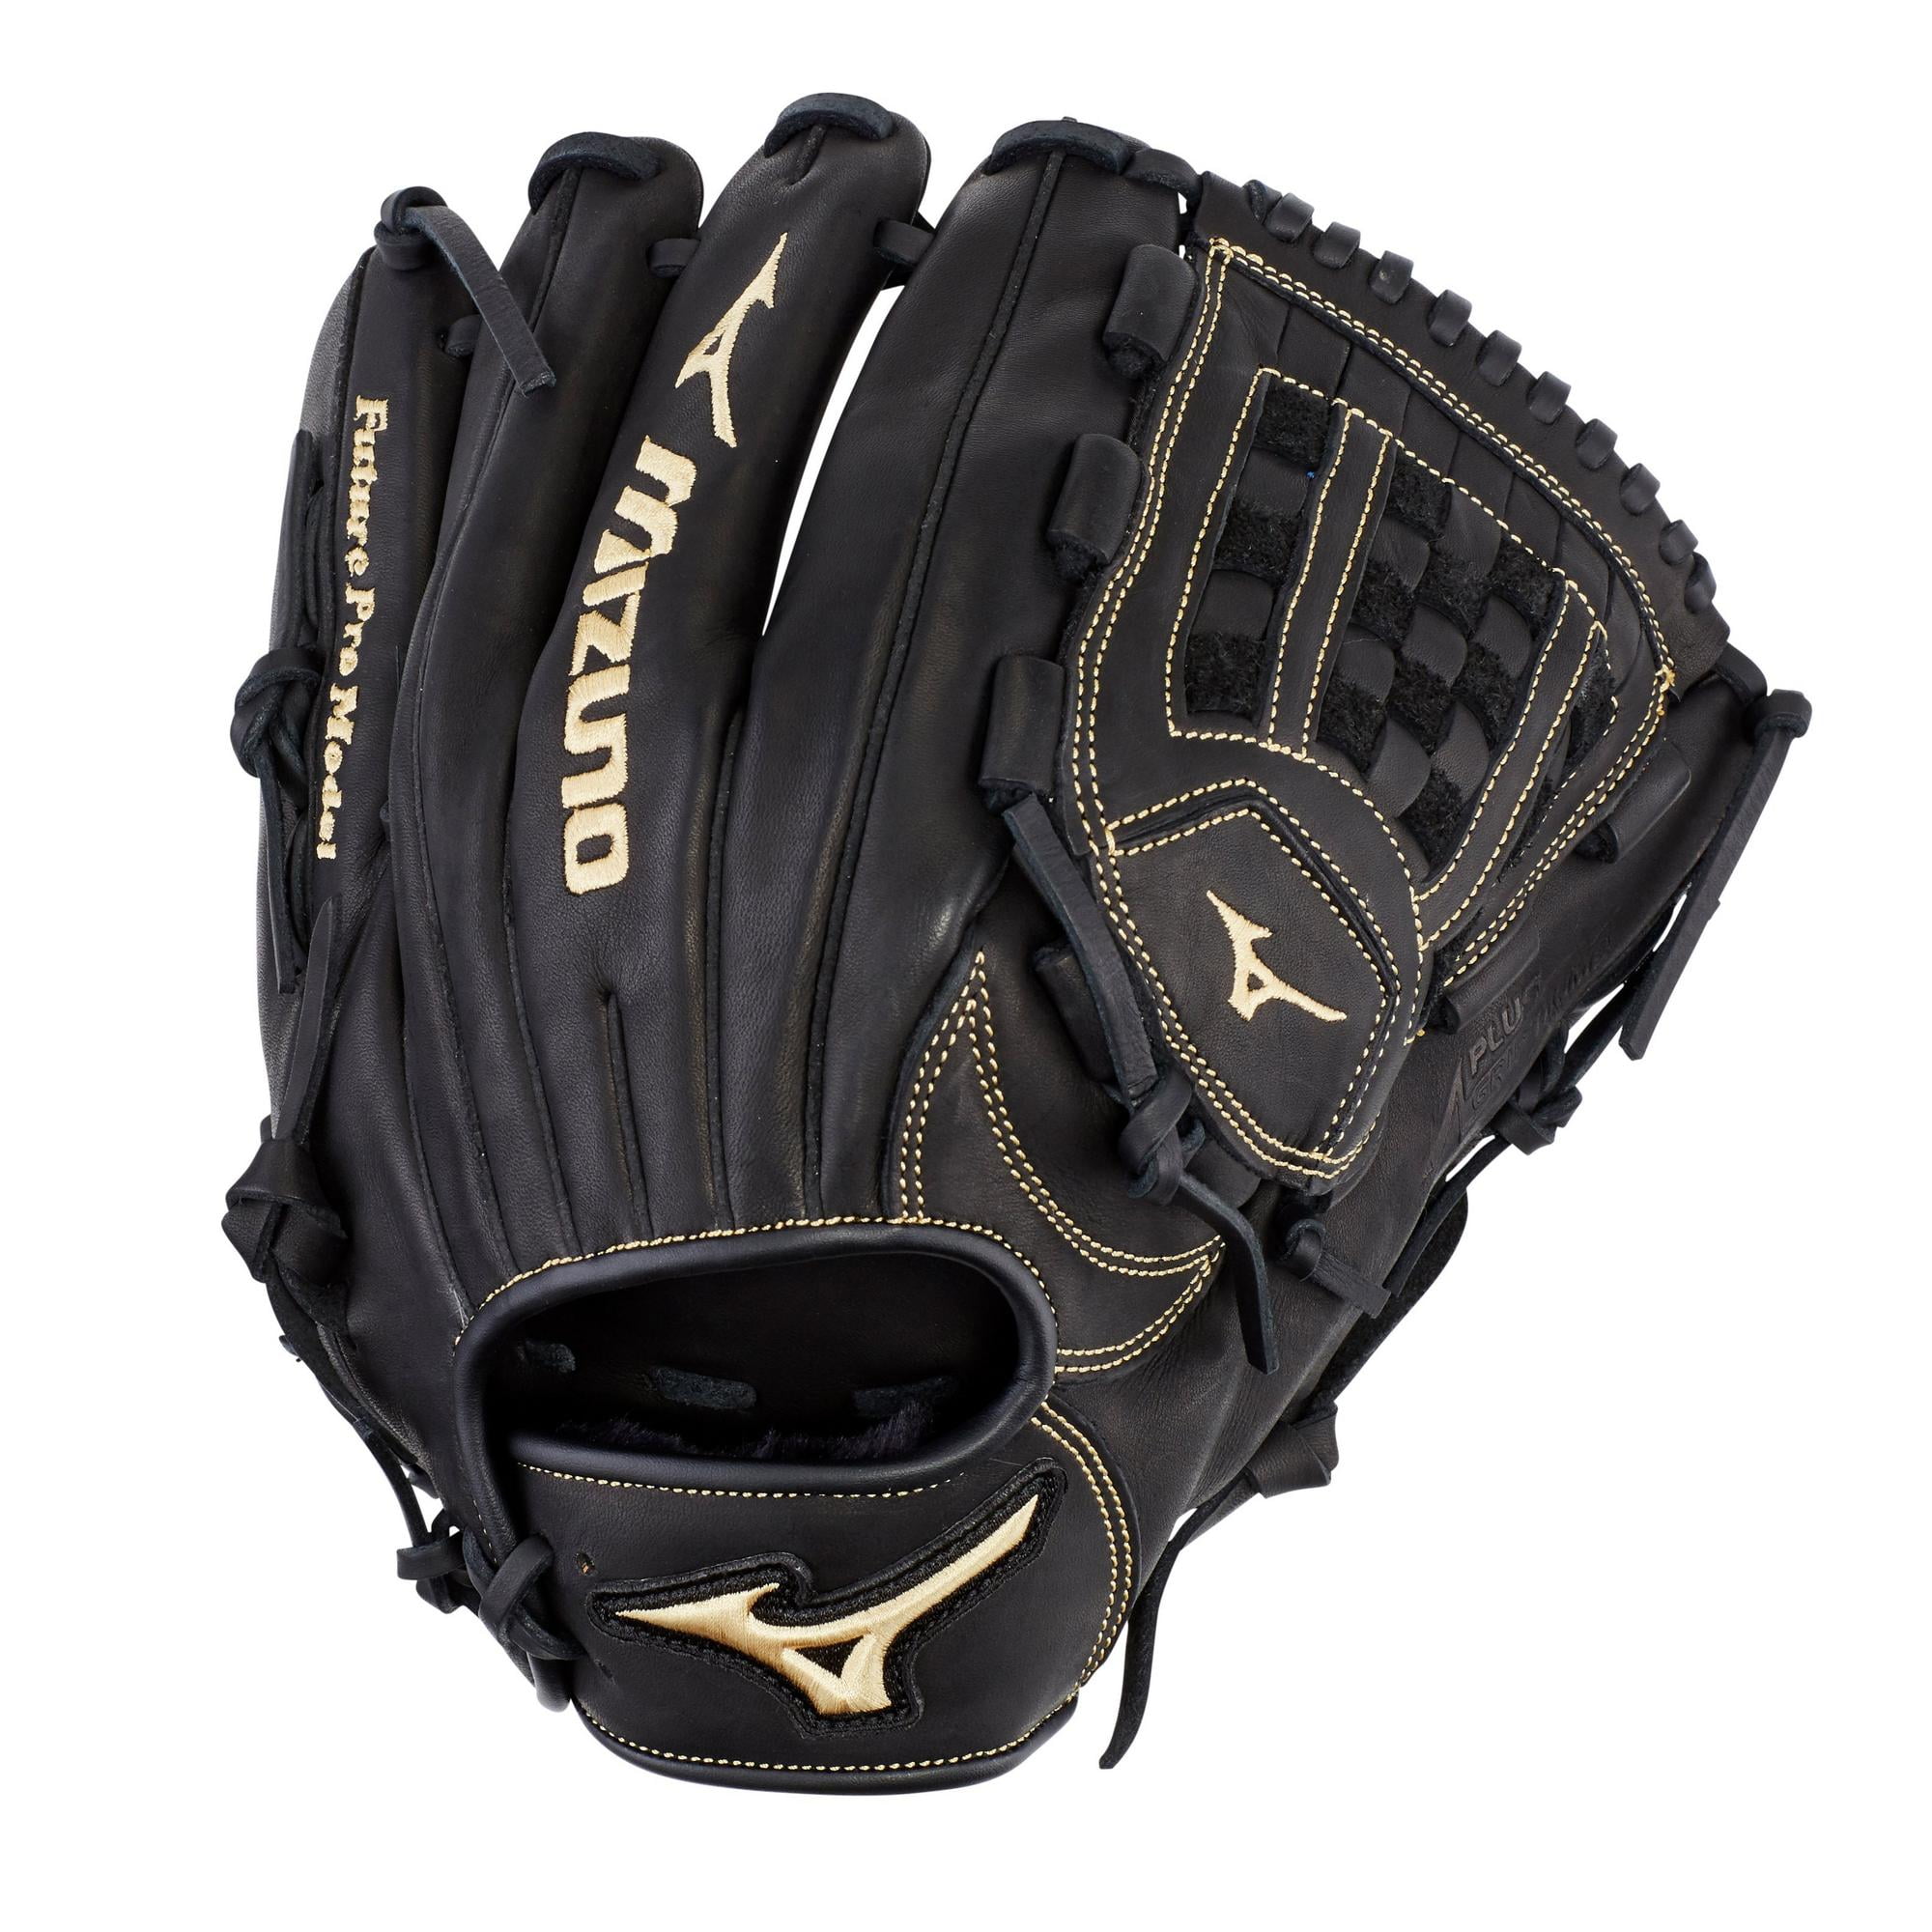 Series Pitcher/Outfield Baseball Glove 